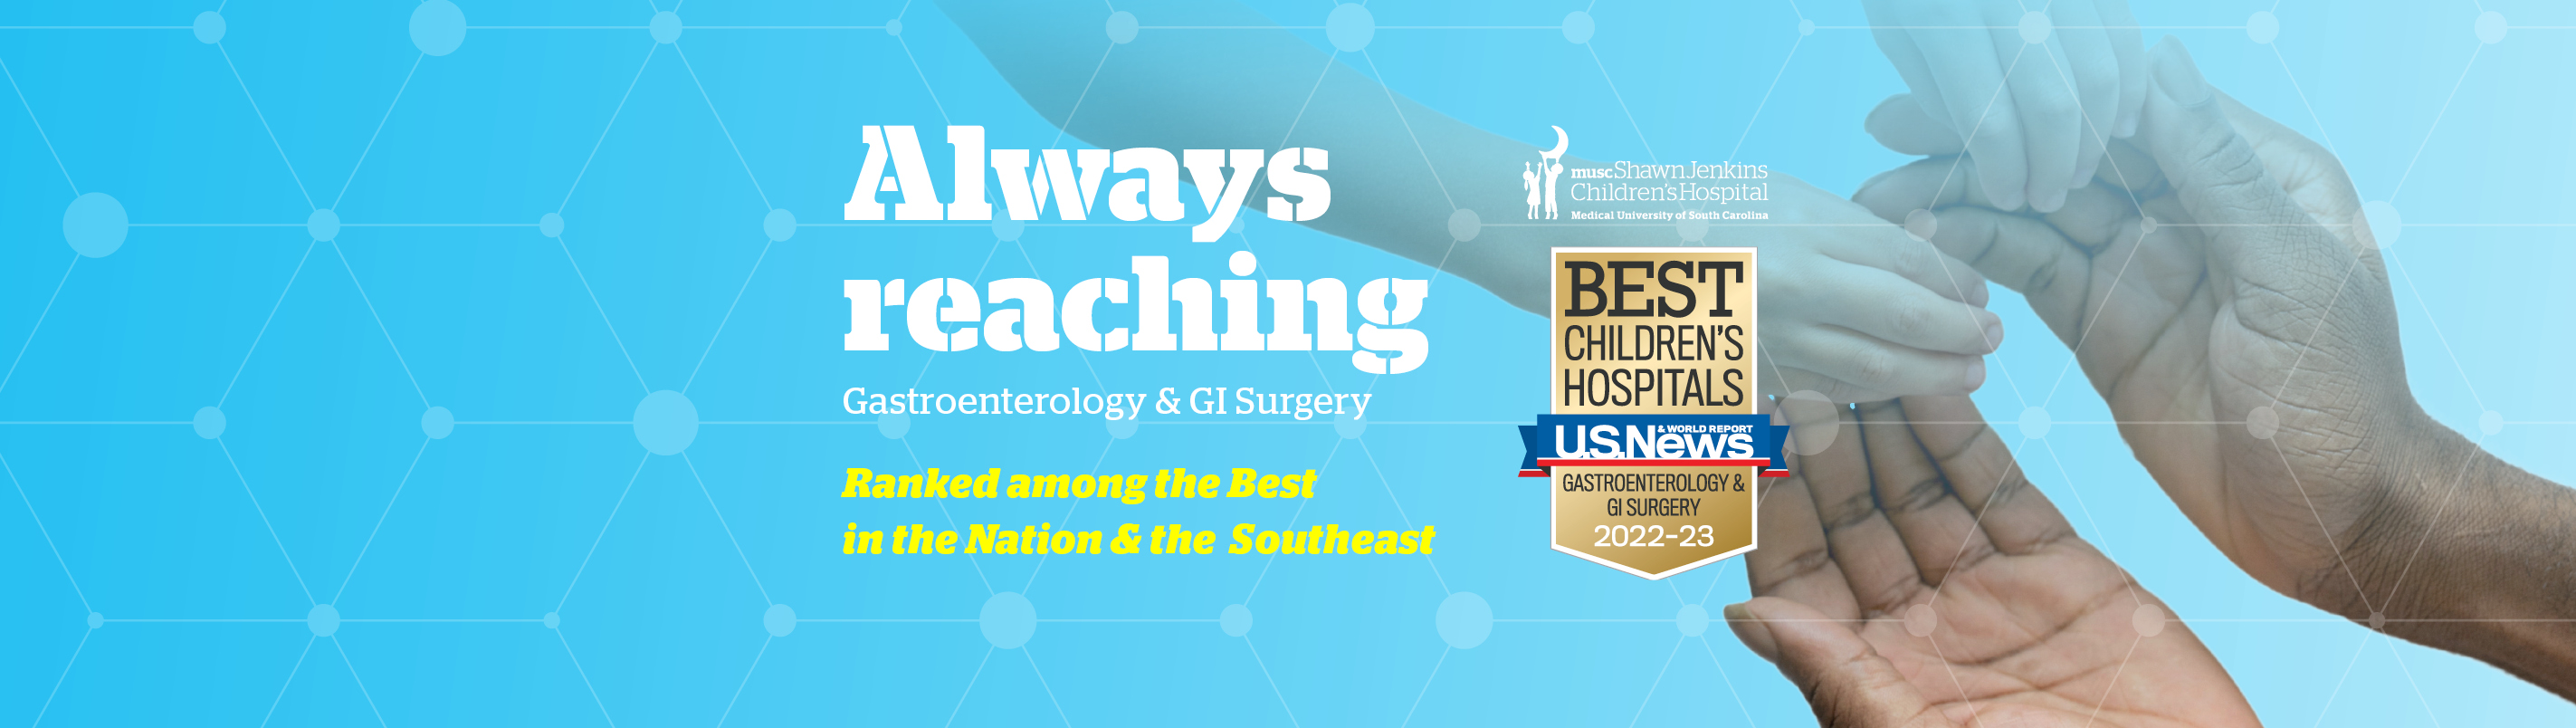 Always reaching | Gastroenterology & GI Surgery | Ranked among the top in the nation #8  Southeast - Overall | Best Children's Hospitals U.S. News & World Report